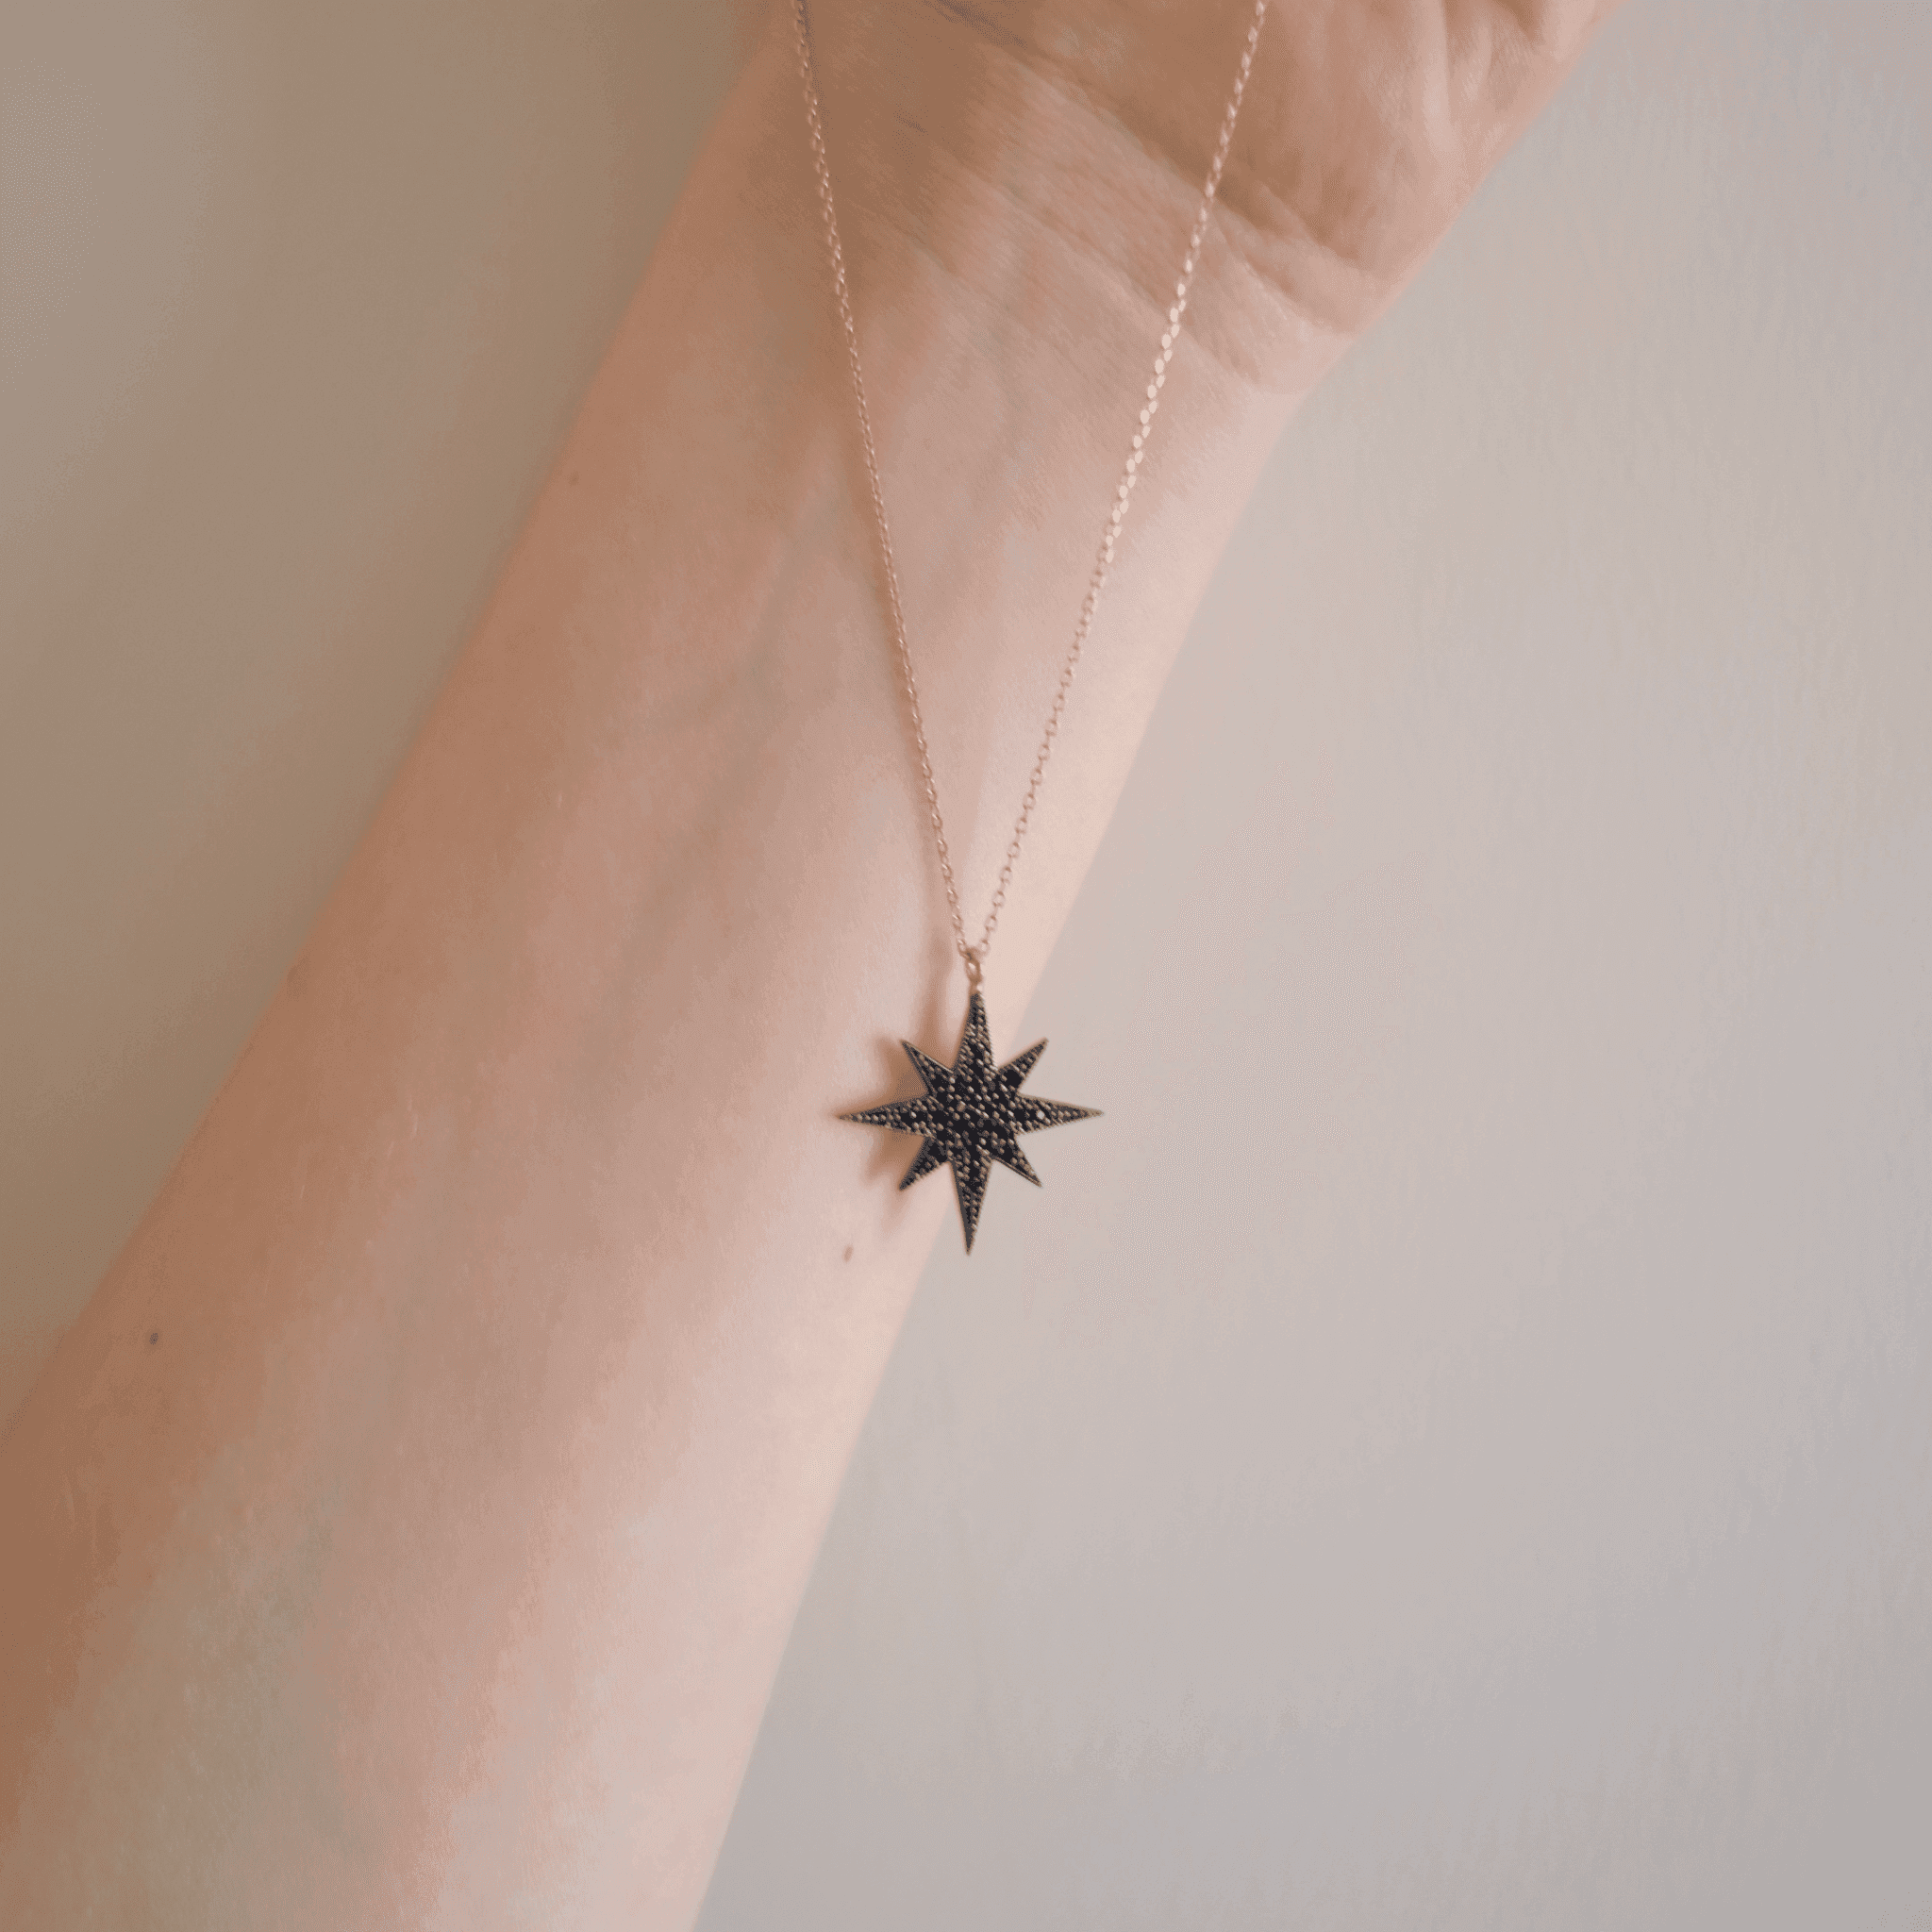 Black Jewellery | Necklaces, Earrings & Charms | Lily Charmed